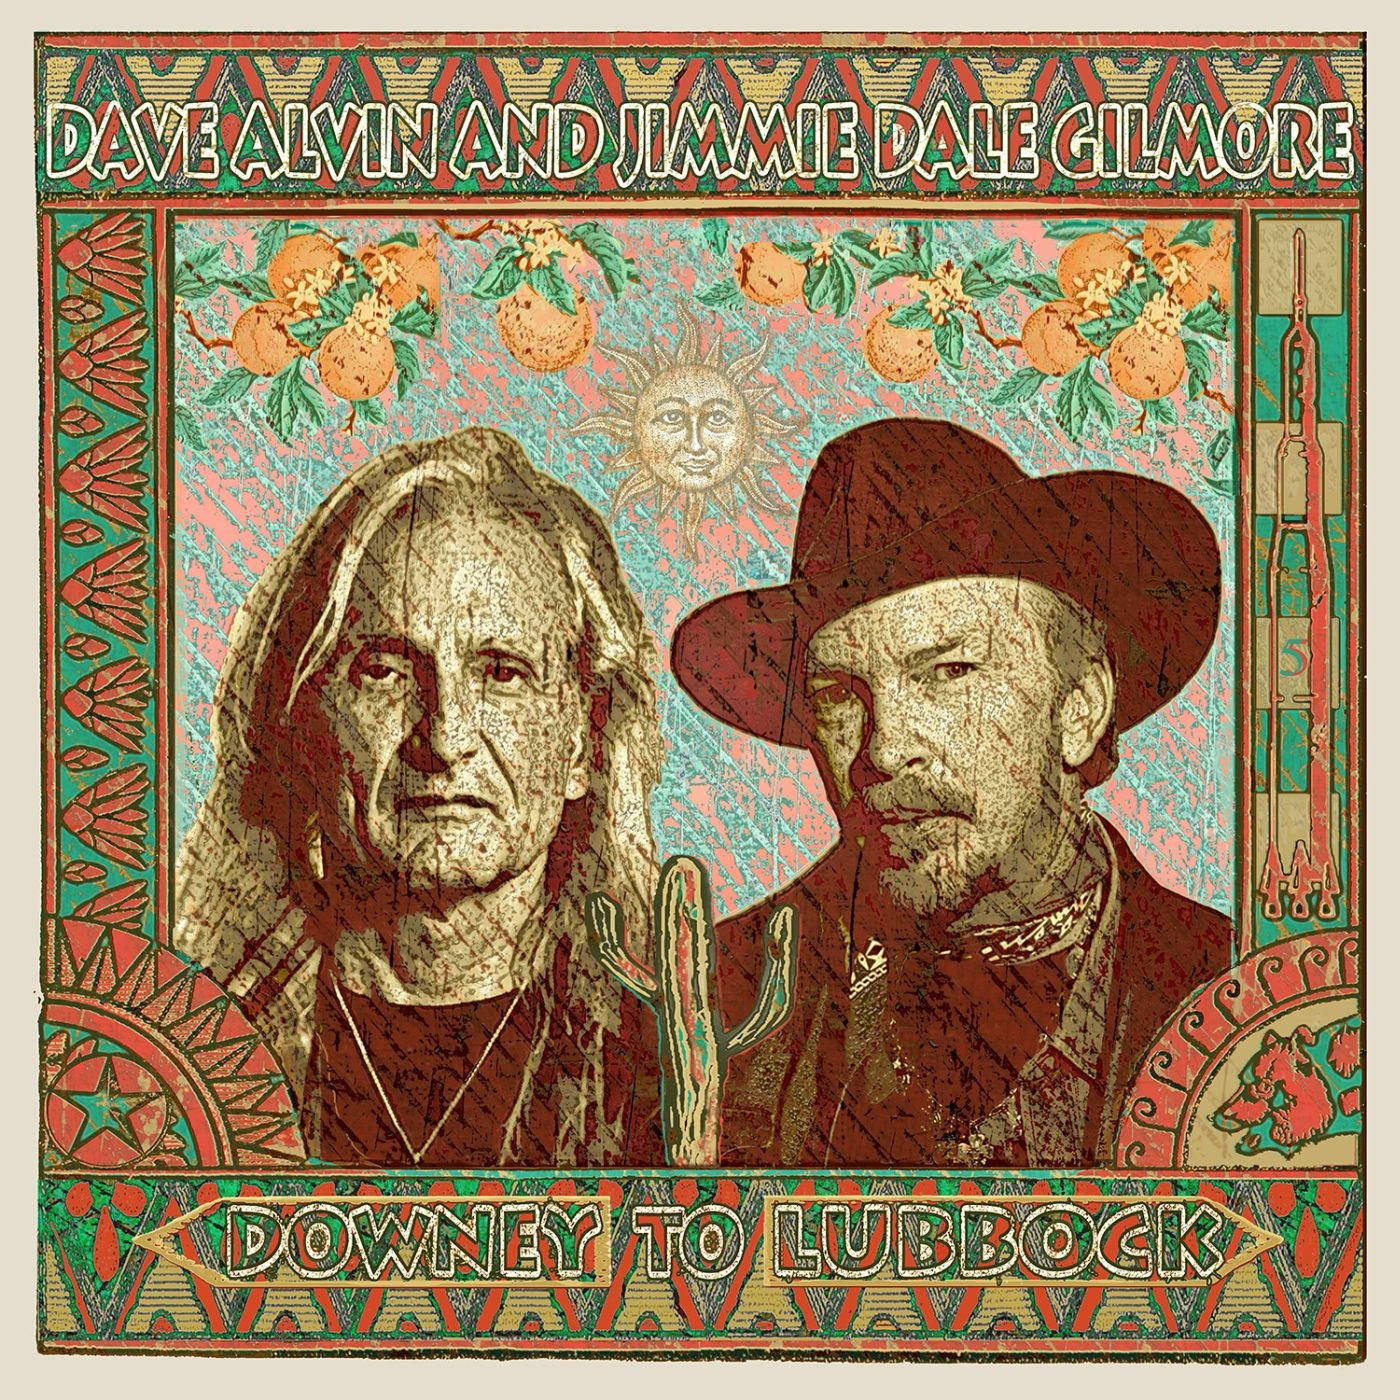 Dave Alvin and Jimmie Dale Gilmore – Downey to Lubbock (2018) [FLAC 24bit/44,1kHz]